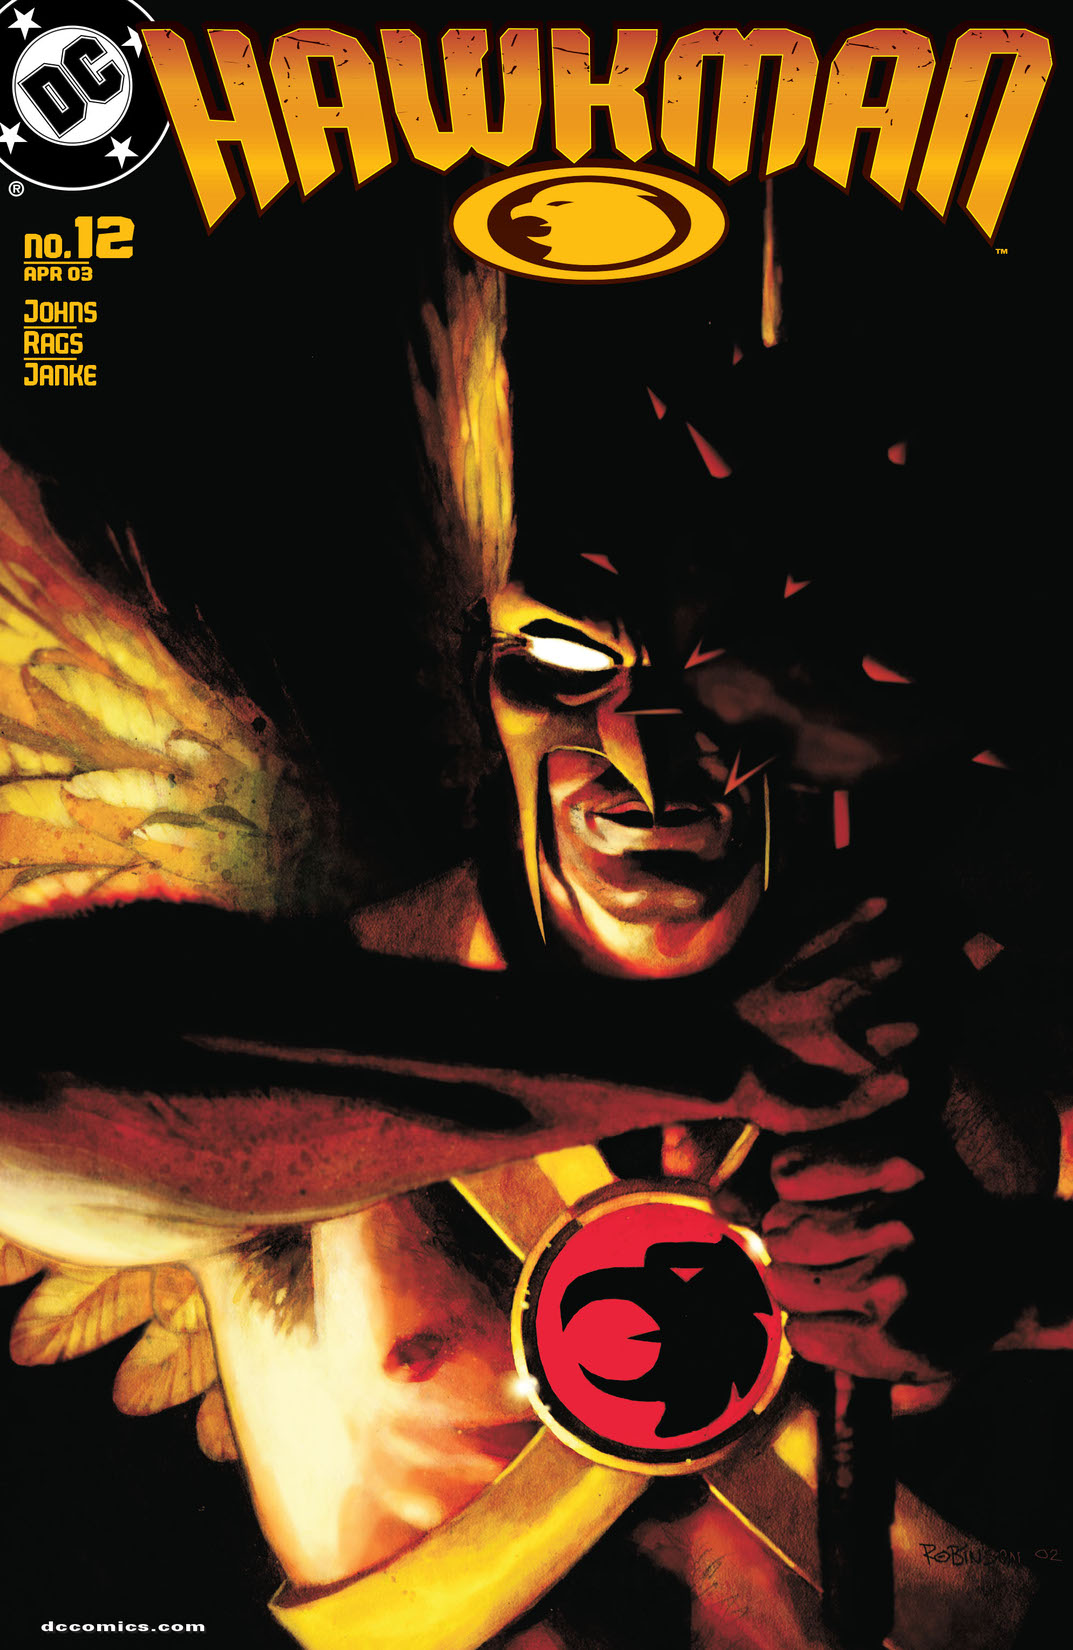 Hawkman (2002-) #12 preview images